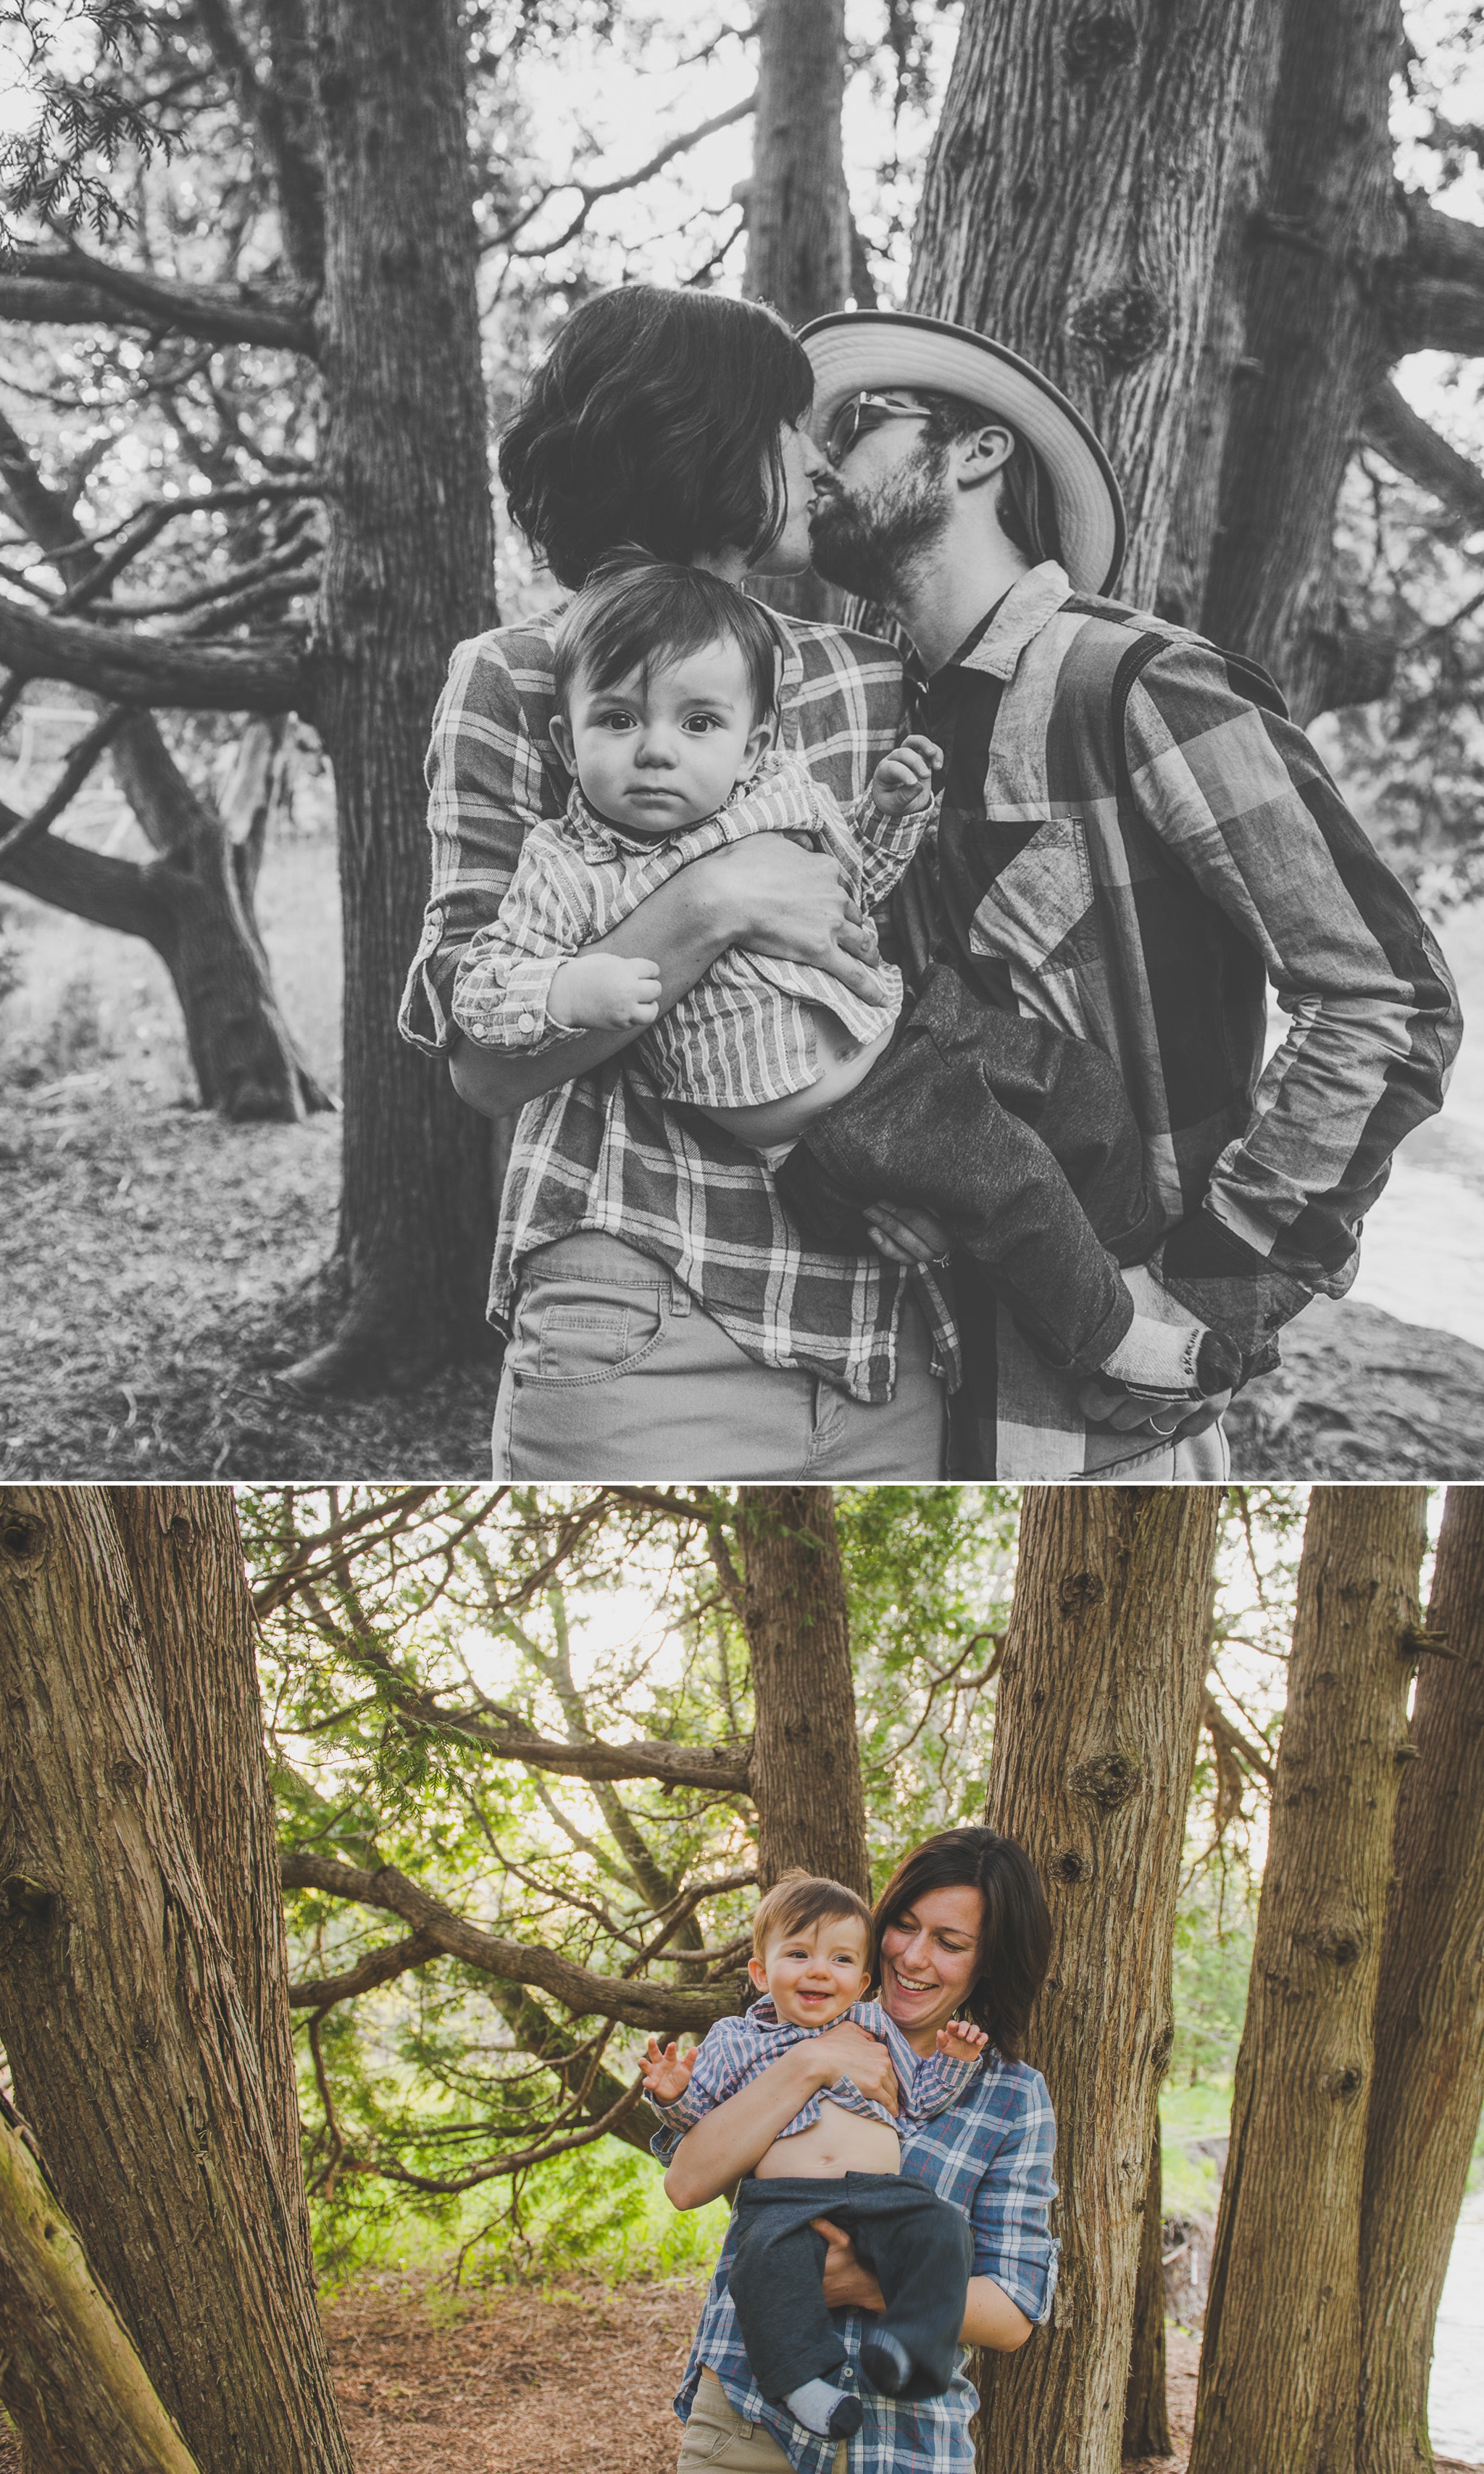 family photography, cobourg ontario, cobourg photographer, port hope photographer, family photographer, family photography, lifestyle photographer, lifestyle photography, toronto photographer, outdoors, woods, sunset, black and white, kiss